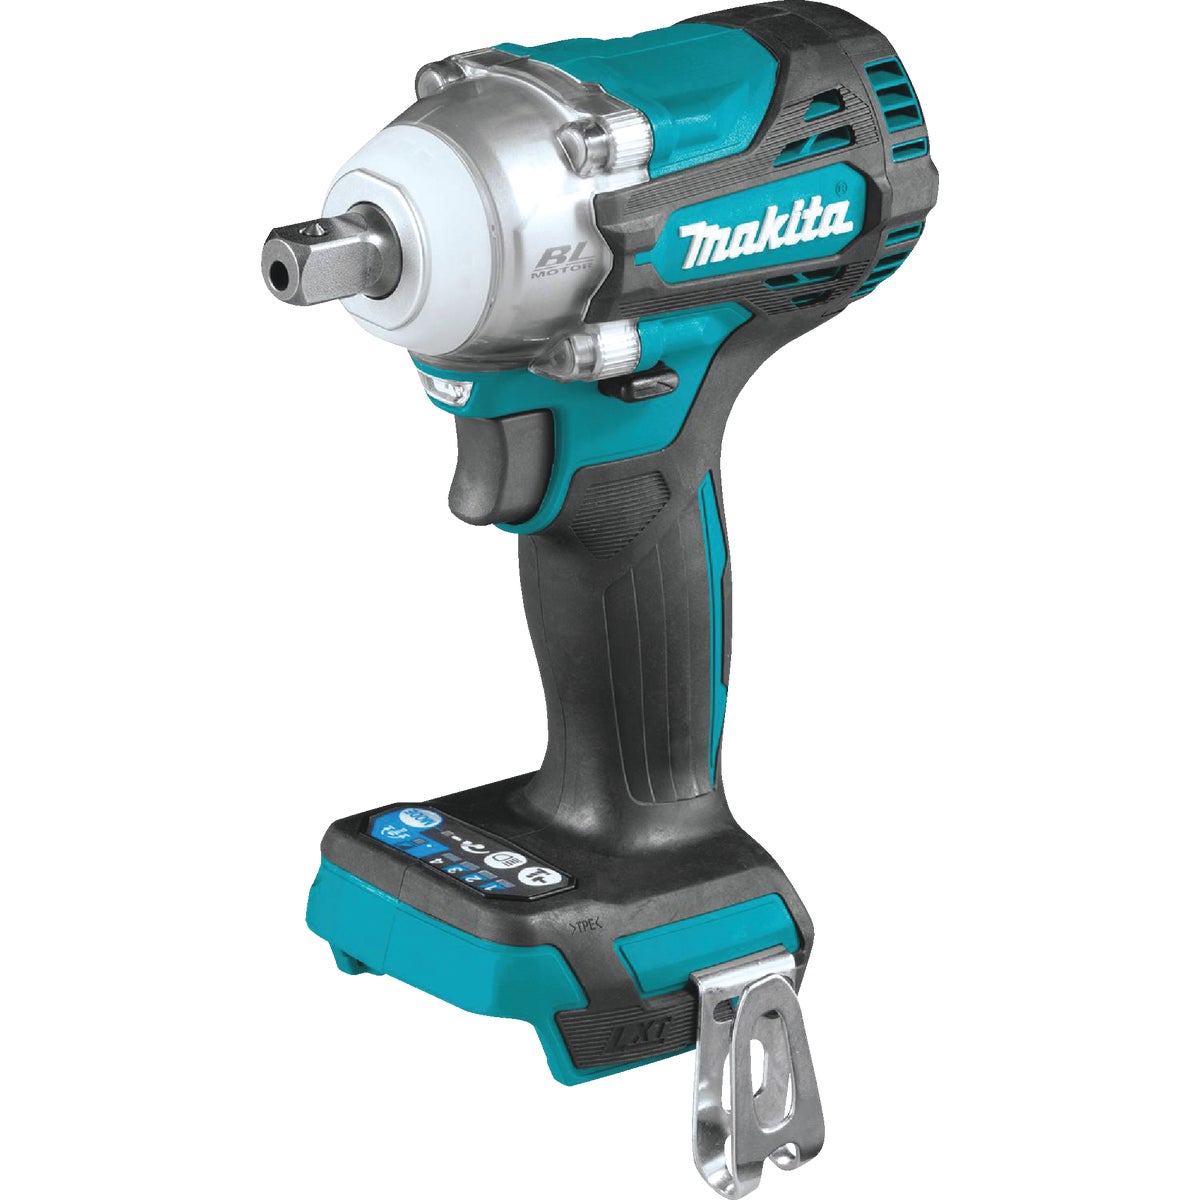 Makita 18 Volt LXT Lithium-Ion Brushless 1/2 In. 4-Speed Cordless Impact Wrench with Detent Anvil (Tool Only)